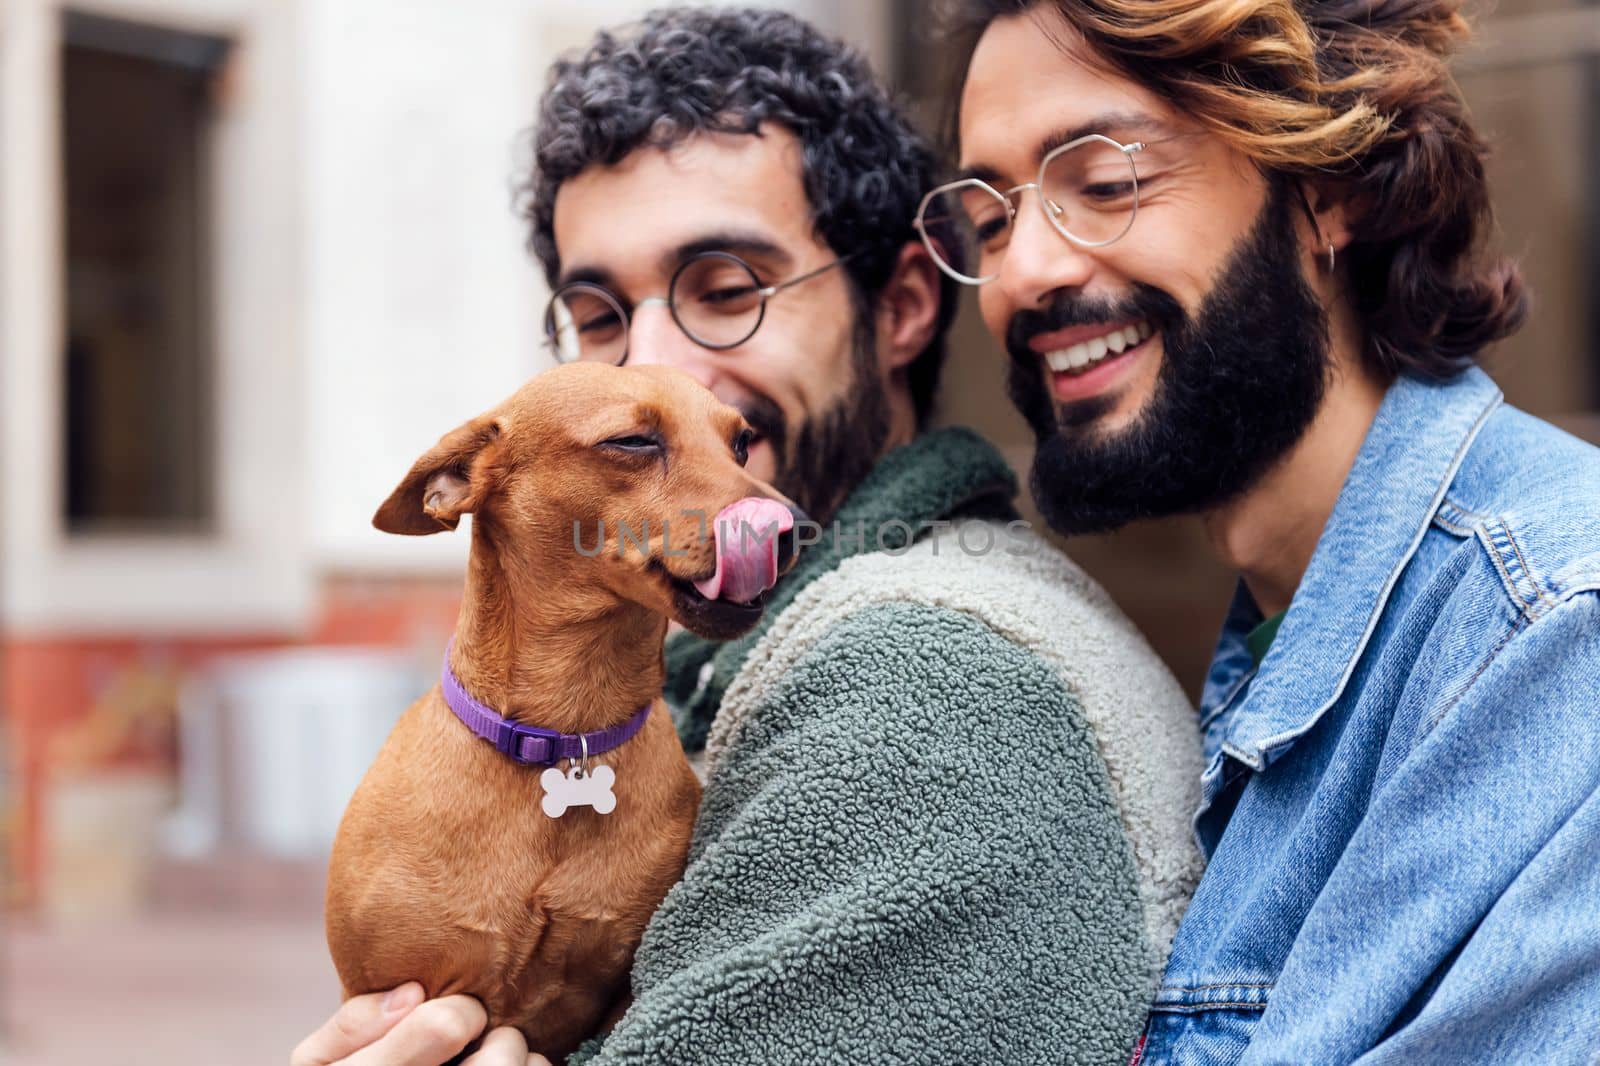 portrait of a little dog licking its nose in the arms of its owners, concept of family lifestyle with pets and love between people of the same sex